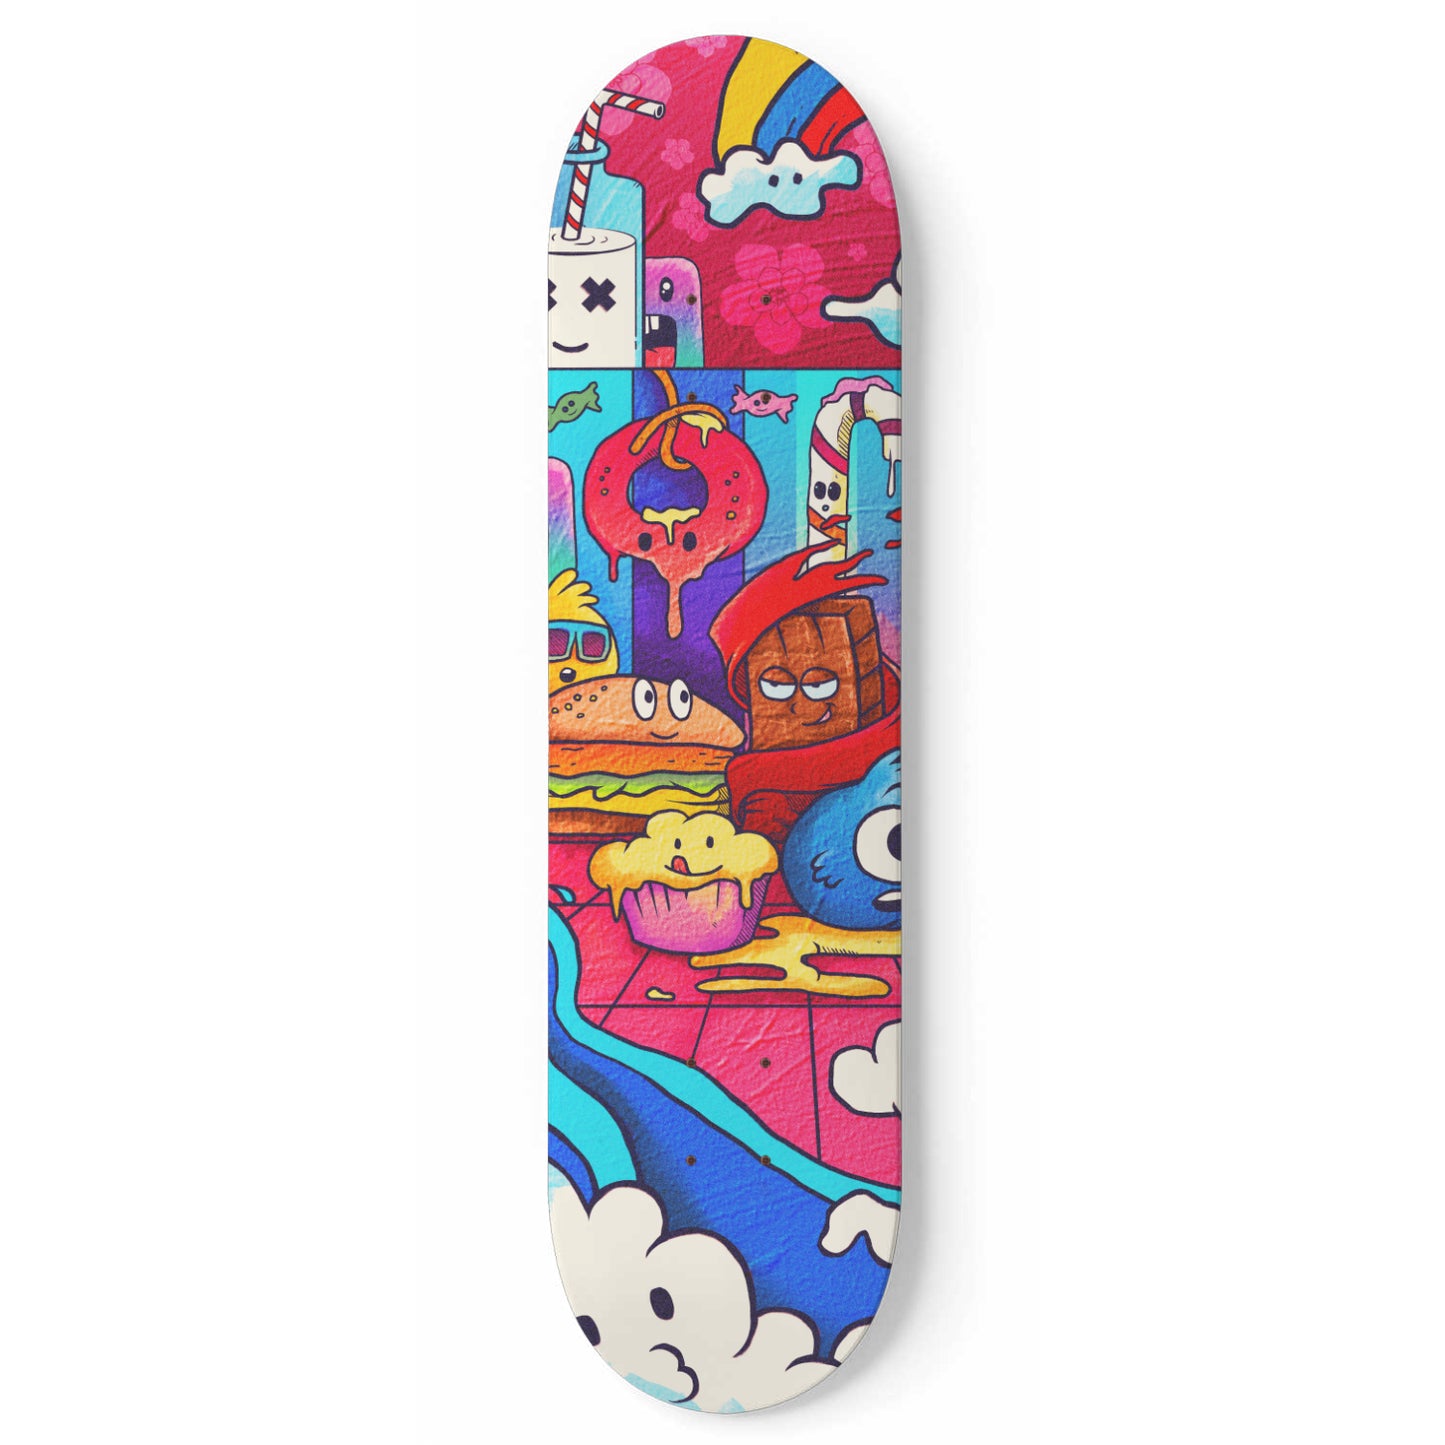 Yums and Sweet Doodle - Skateboard Wall Art